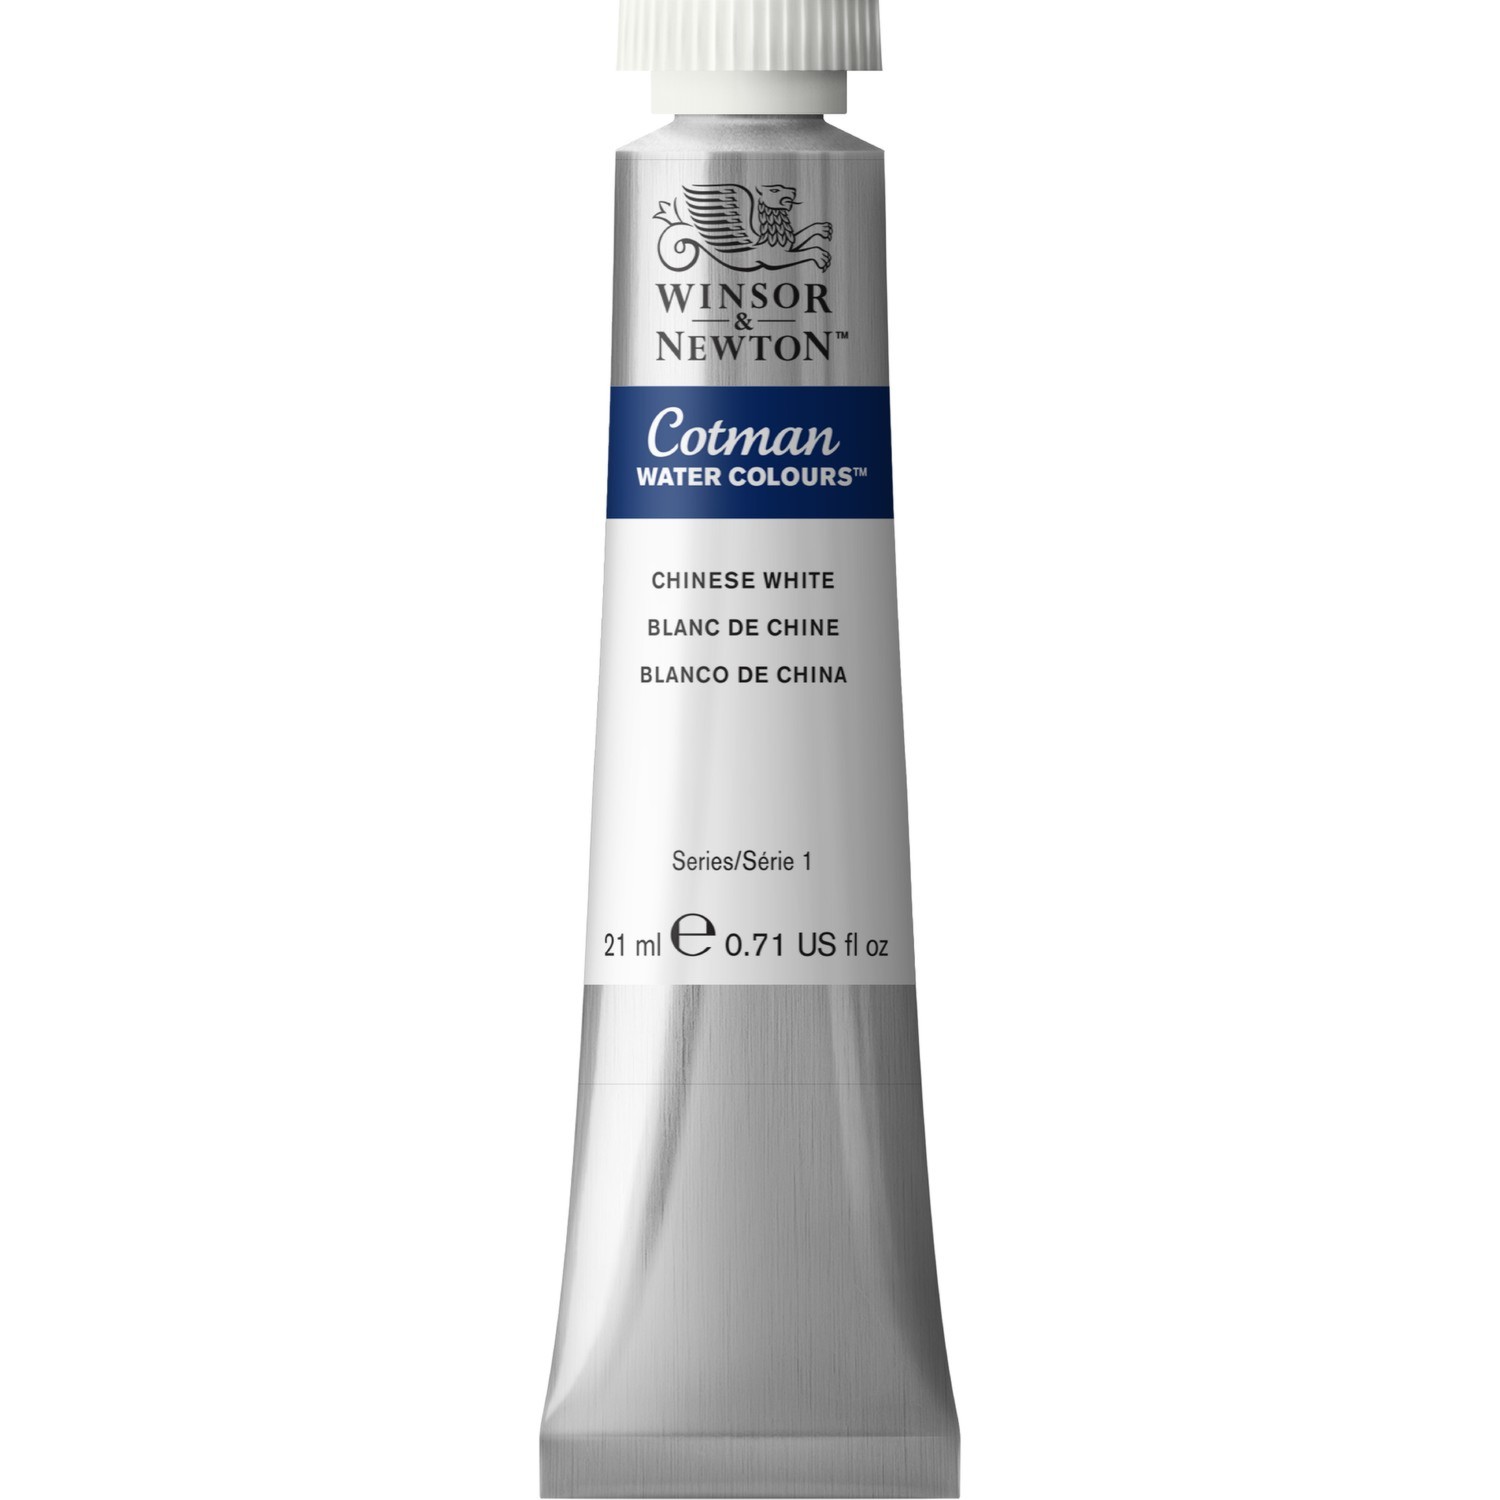 Winsor and Newton Cotman Watercolour Paint 21ml - Chinese White Image 1